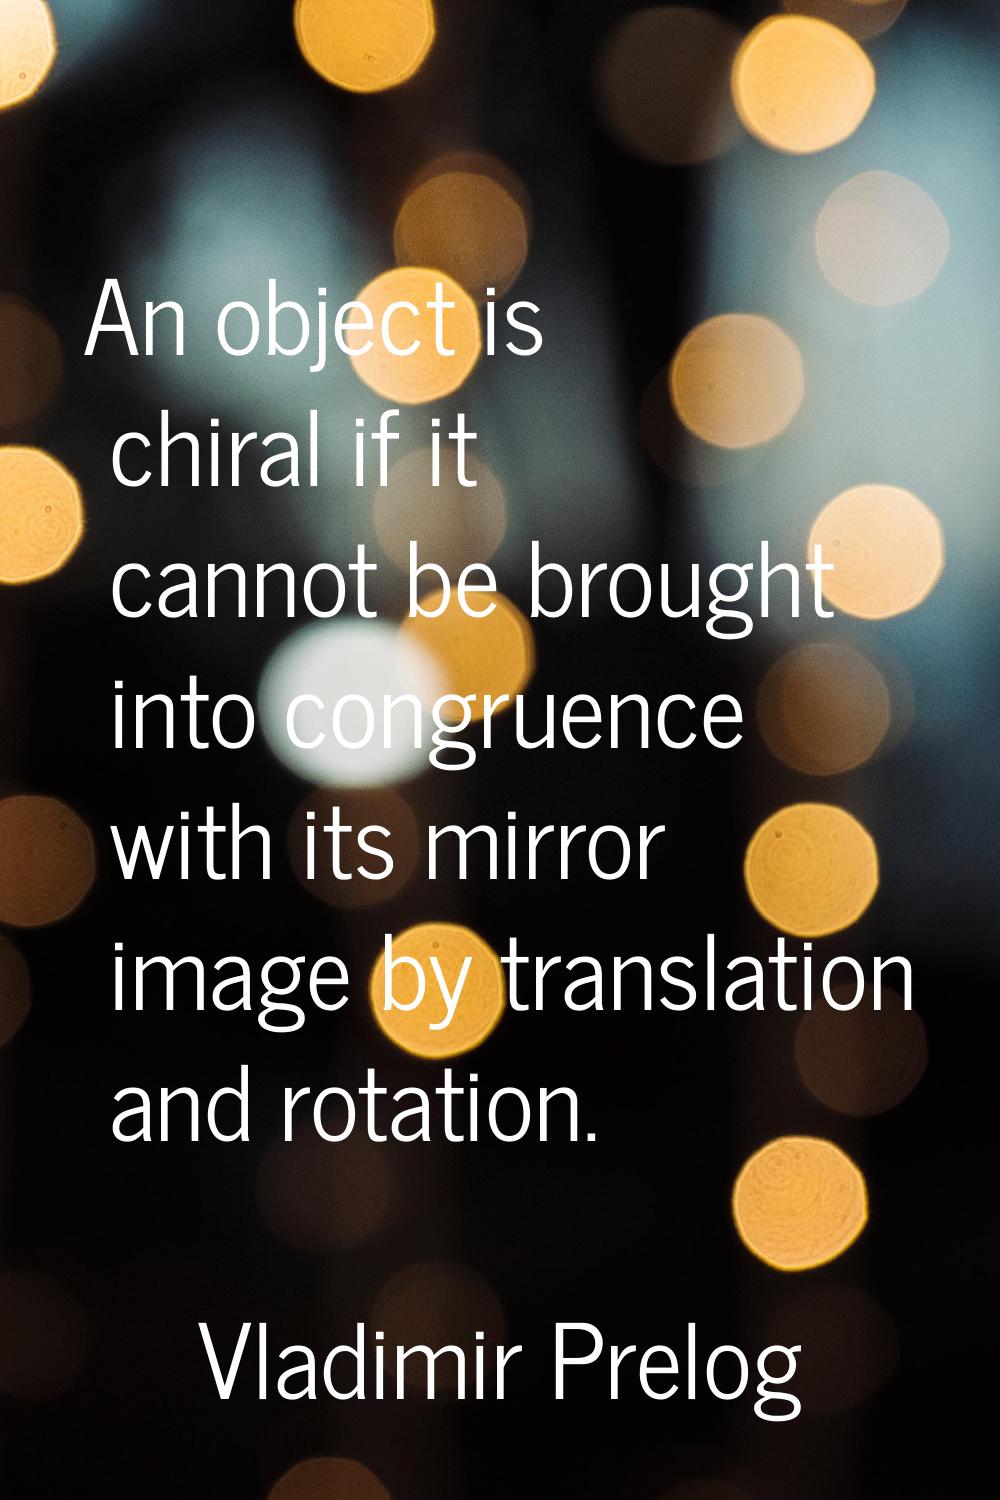 An object is chiral if it cannot be brought into congruence with its mirror image by translation an